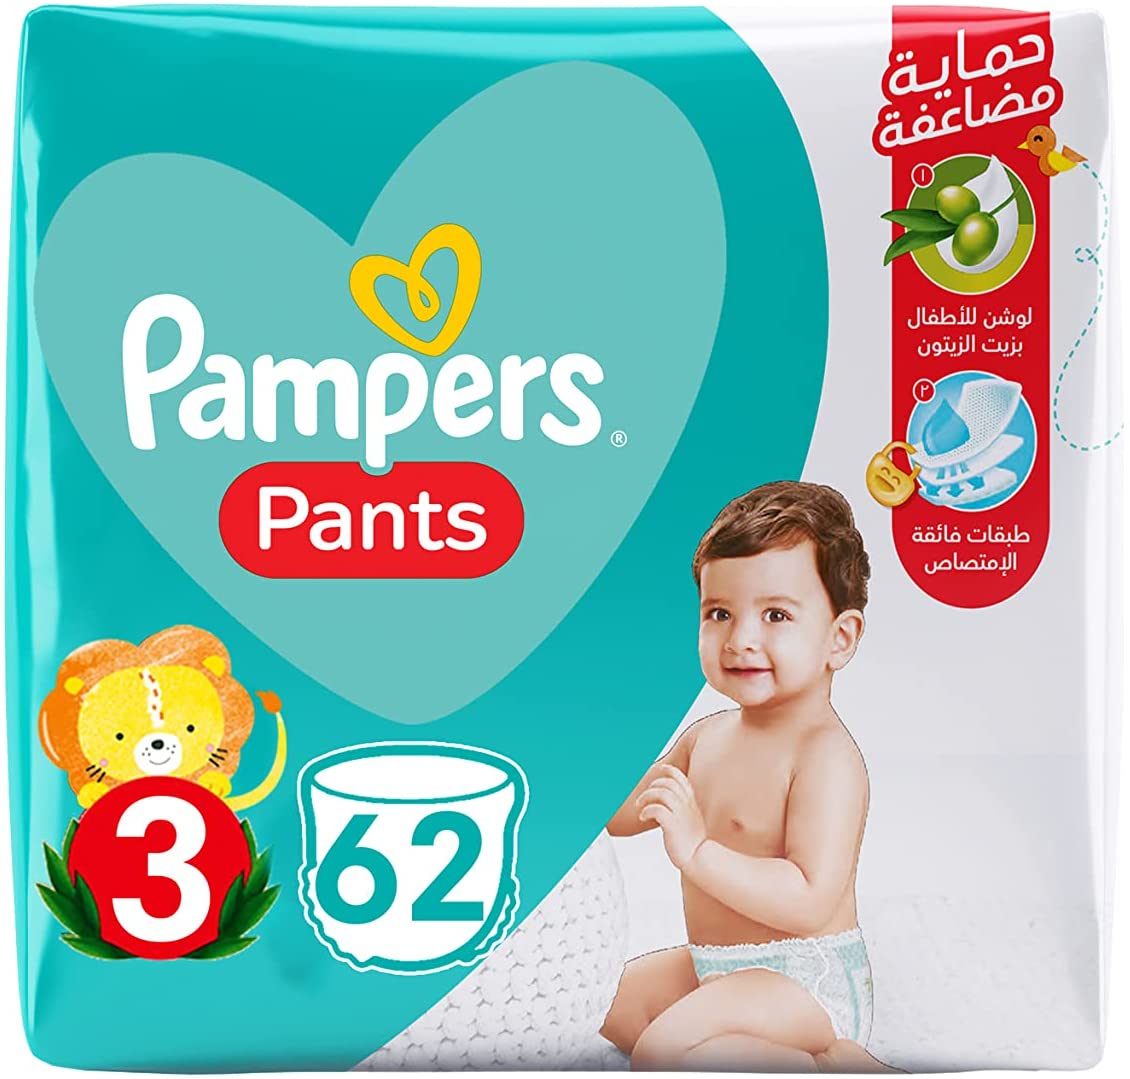 Pampers Pants Diapers Size 3, 6-11 Kg, 62 pants